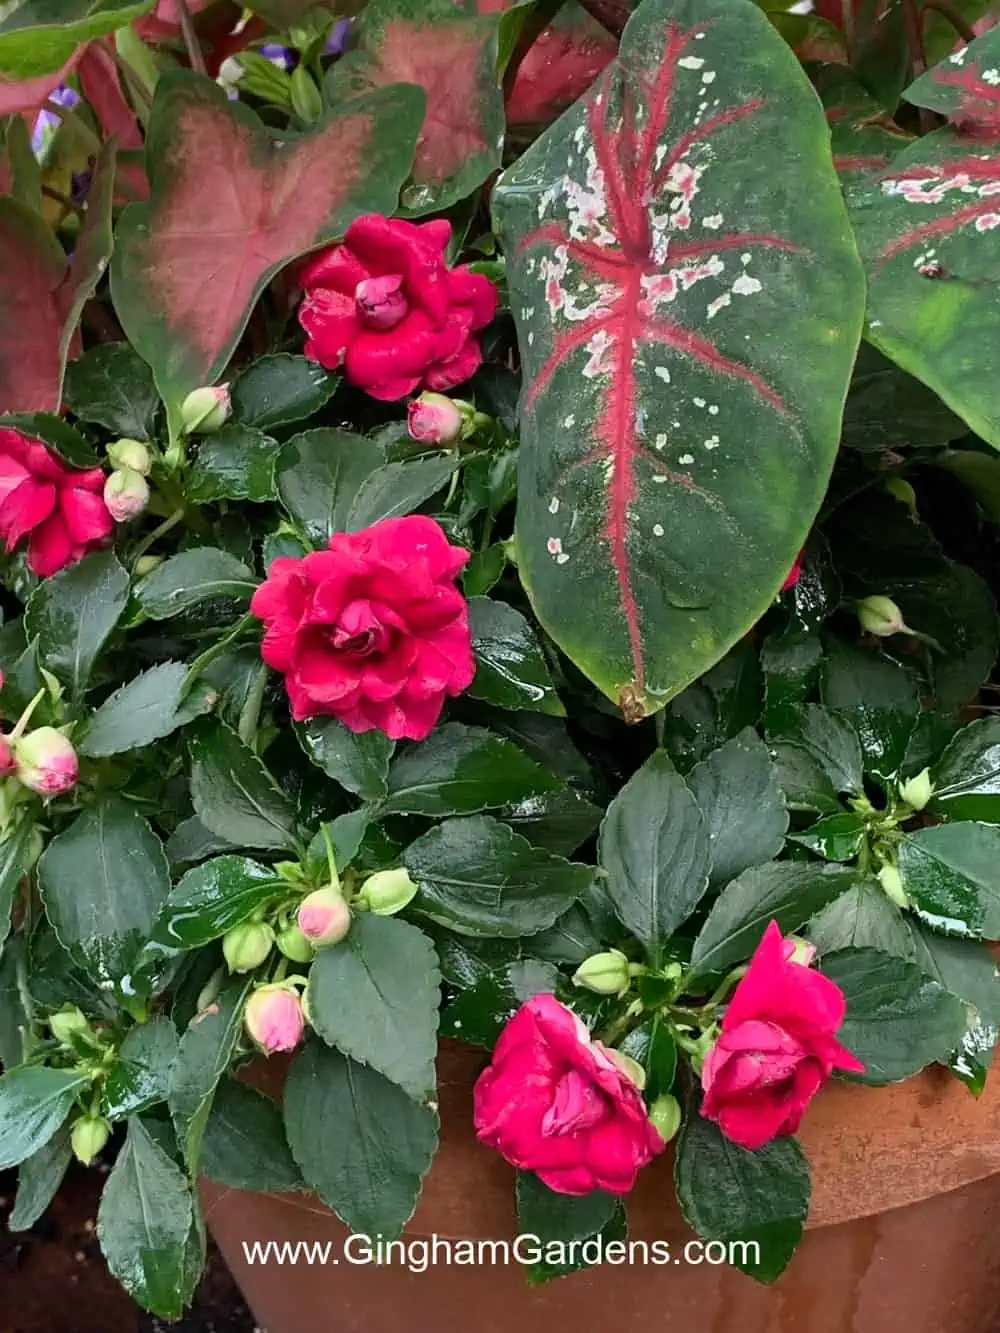 Bright magenta colored double impatiens and caladium plants in a shade container planting.